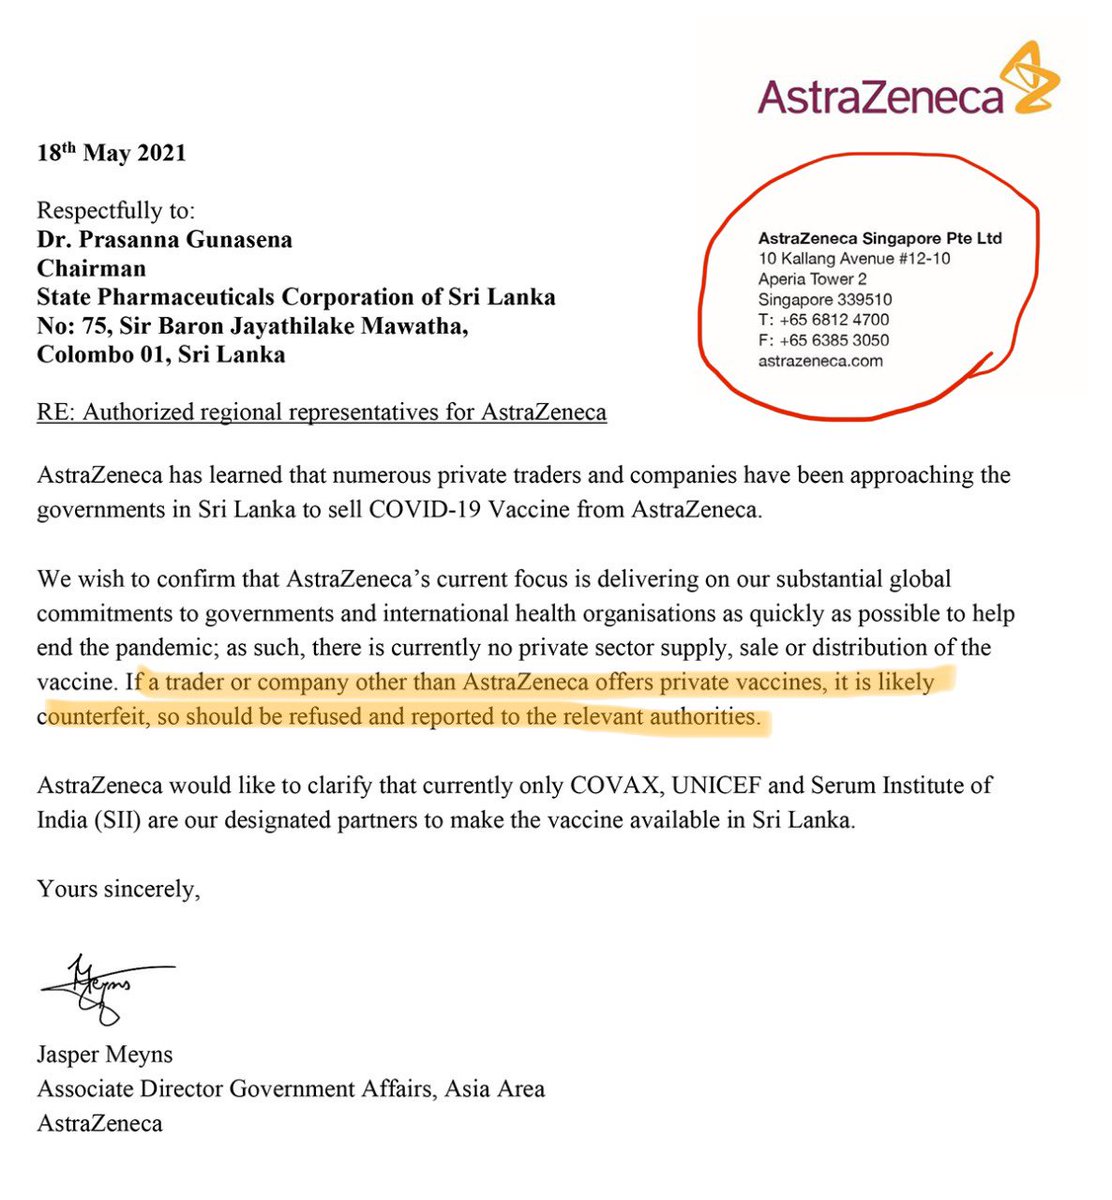 600,000 lives stranded without second dose of #AstraZeneca while vaccine program is in shambles in #SriLanka. Only option is to report directly... Equality, Justice, Hope...#බොක්කෙන්මlankan @sarojpathi @sujatagamage